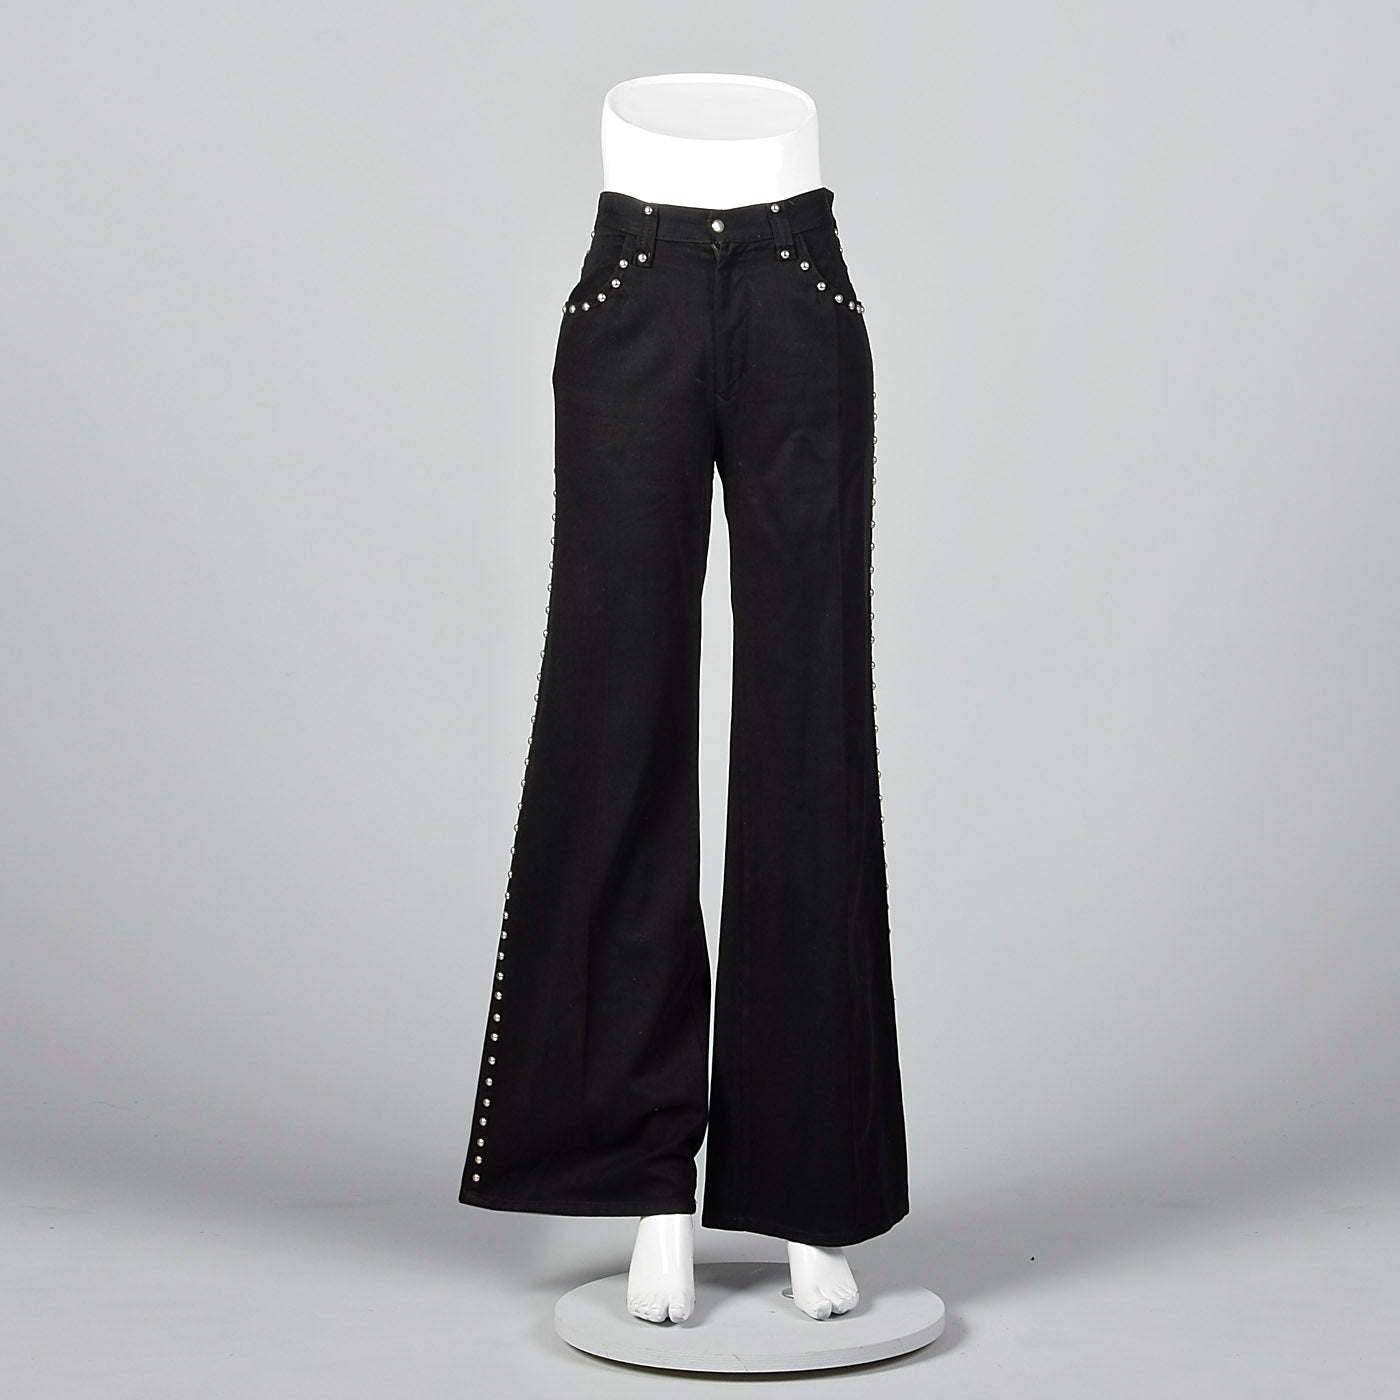 1970s Silver Studded Black Bell Bottoms